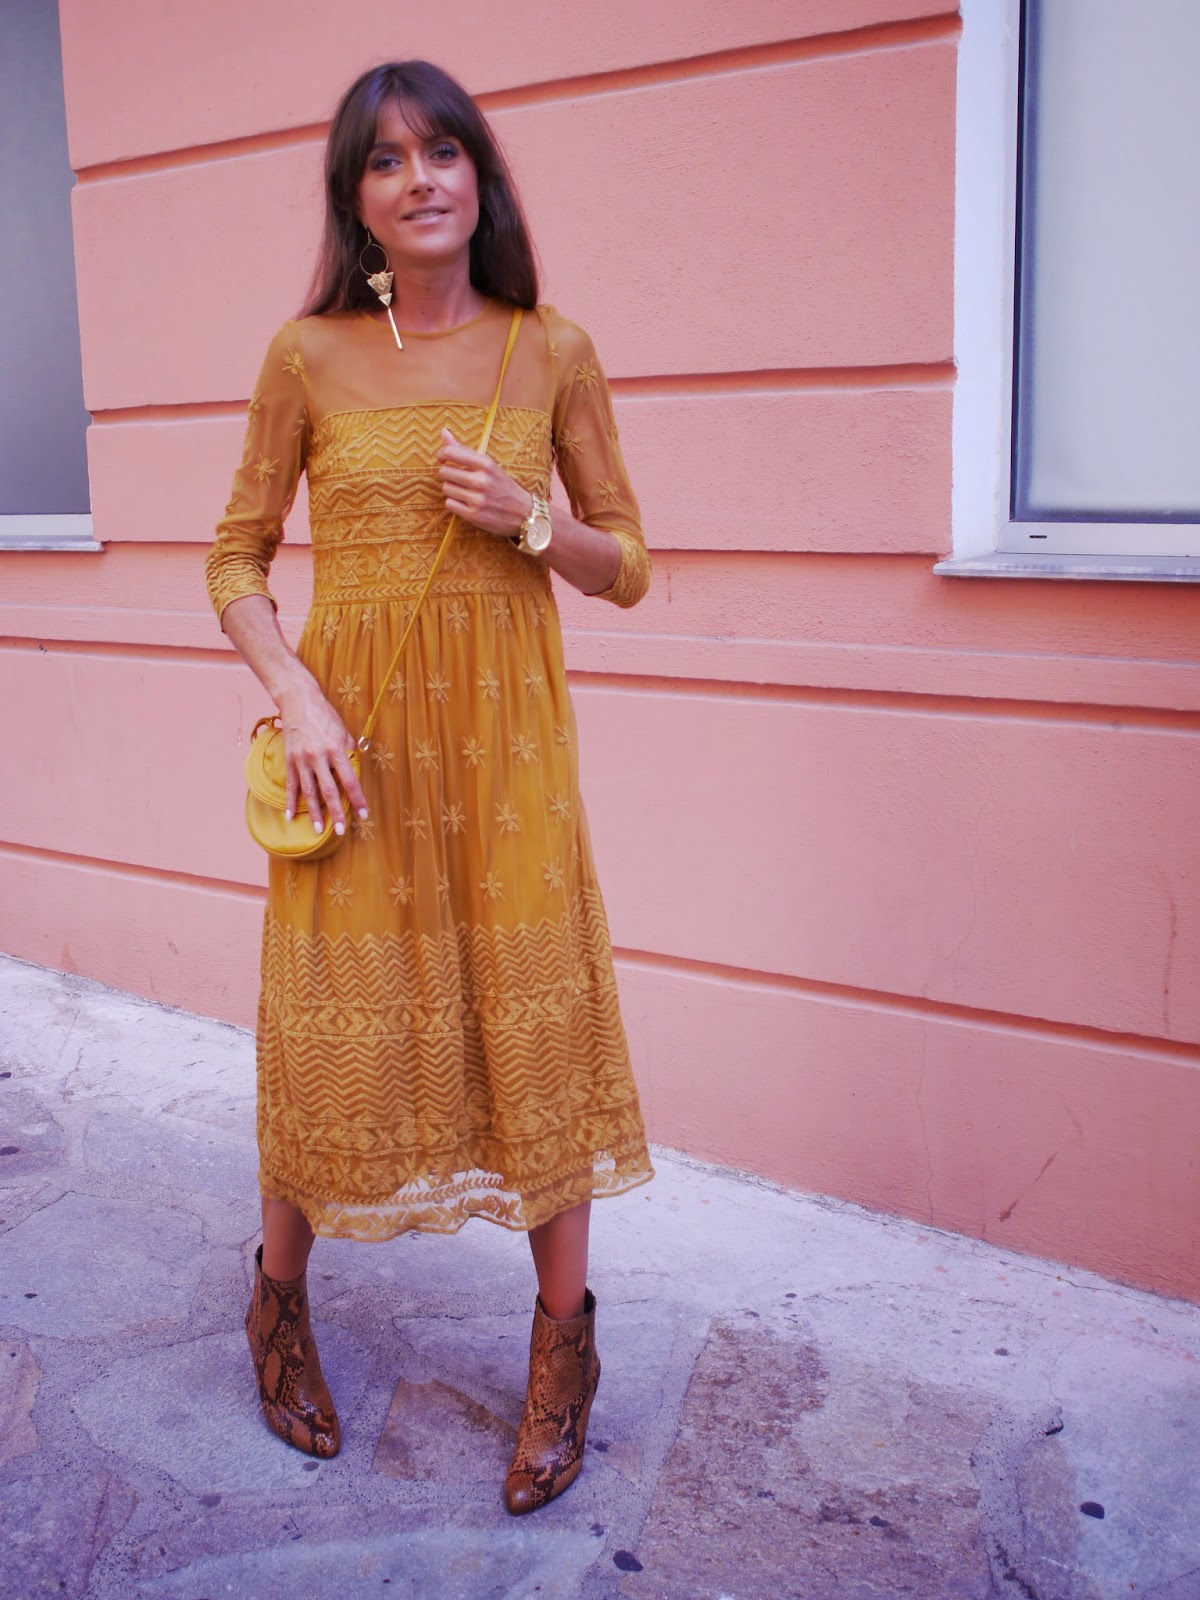 Fashion Musings Diary: Mellow Yellow Lace Dress and Python Boots Monday